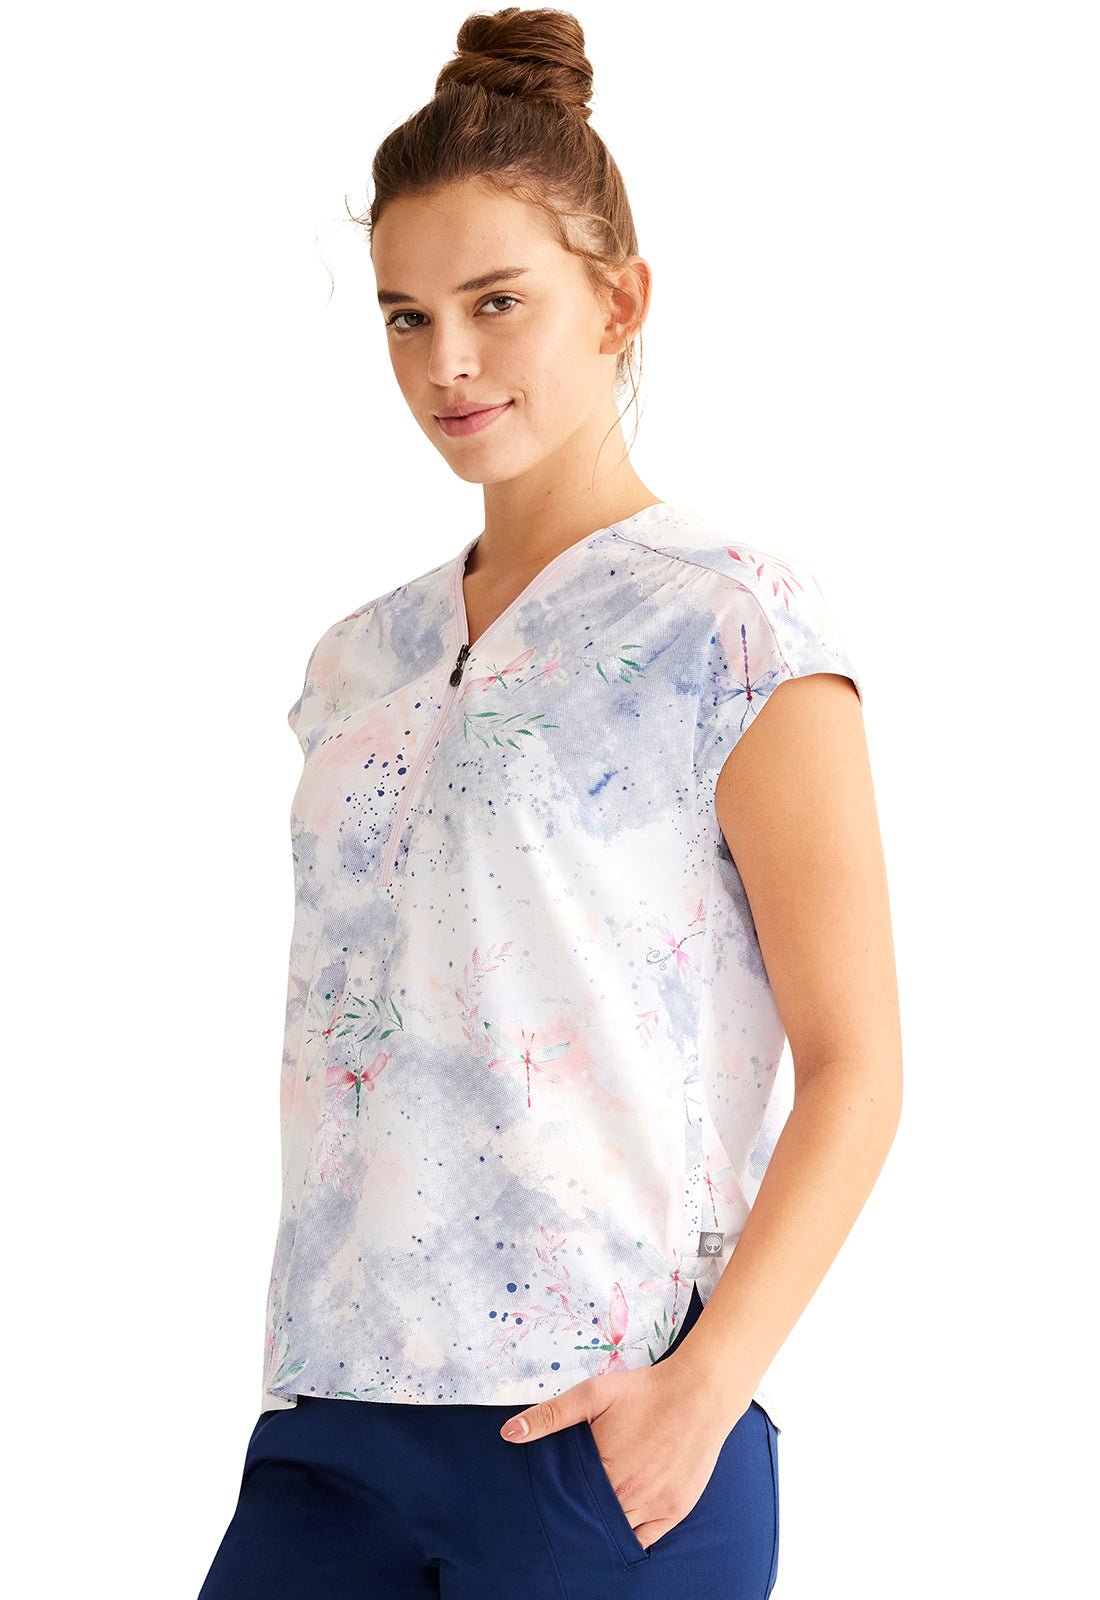 Dragon Fly Healing Hands Limited Edition Zip Front Scrub Top HH902 DGFL - Scrubs Select